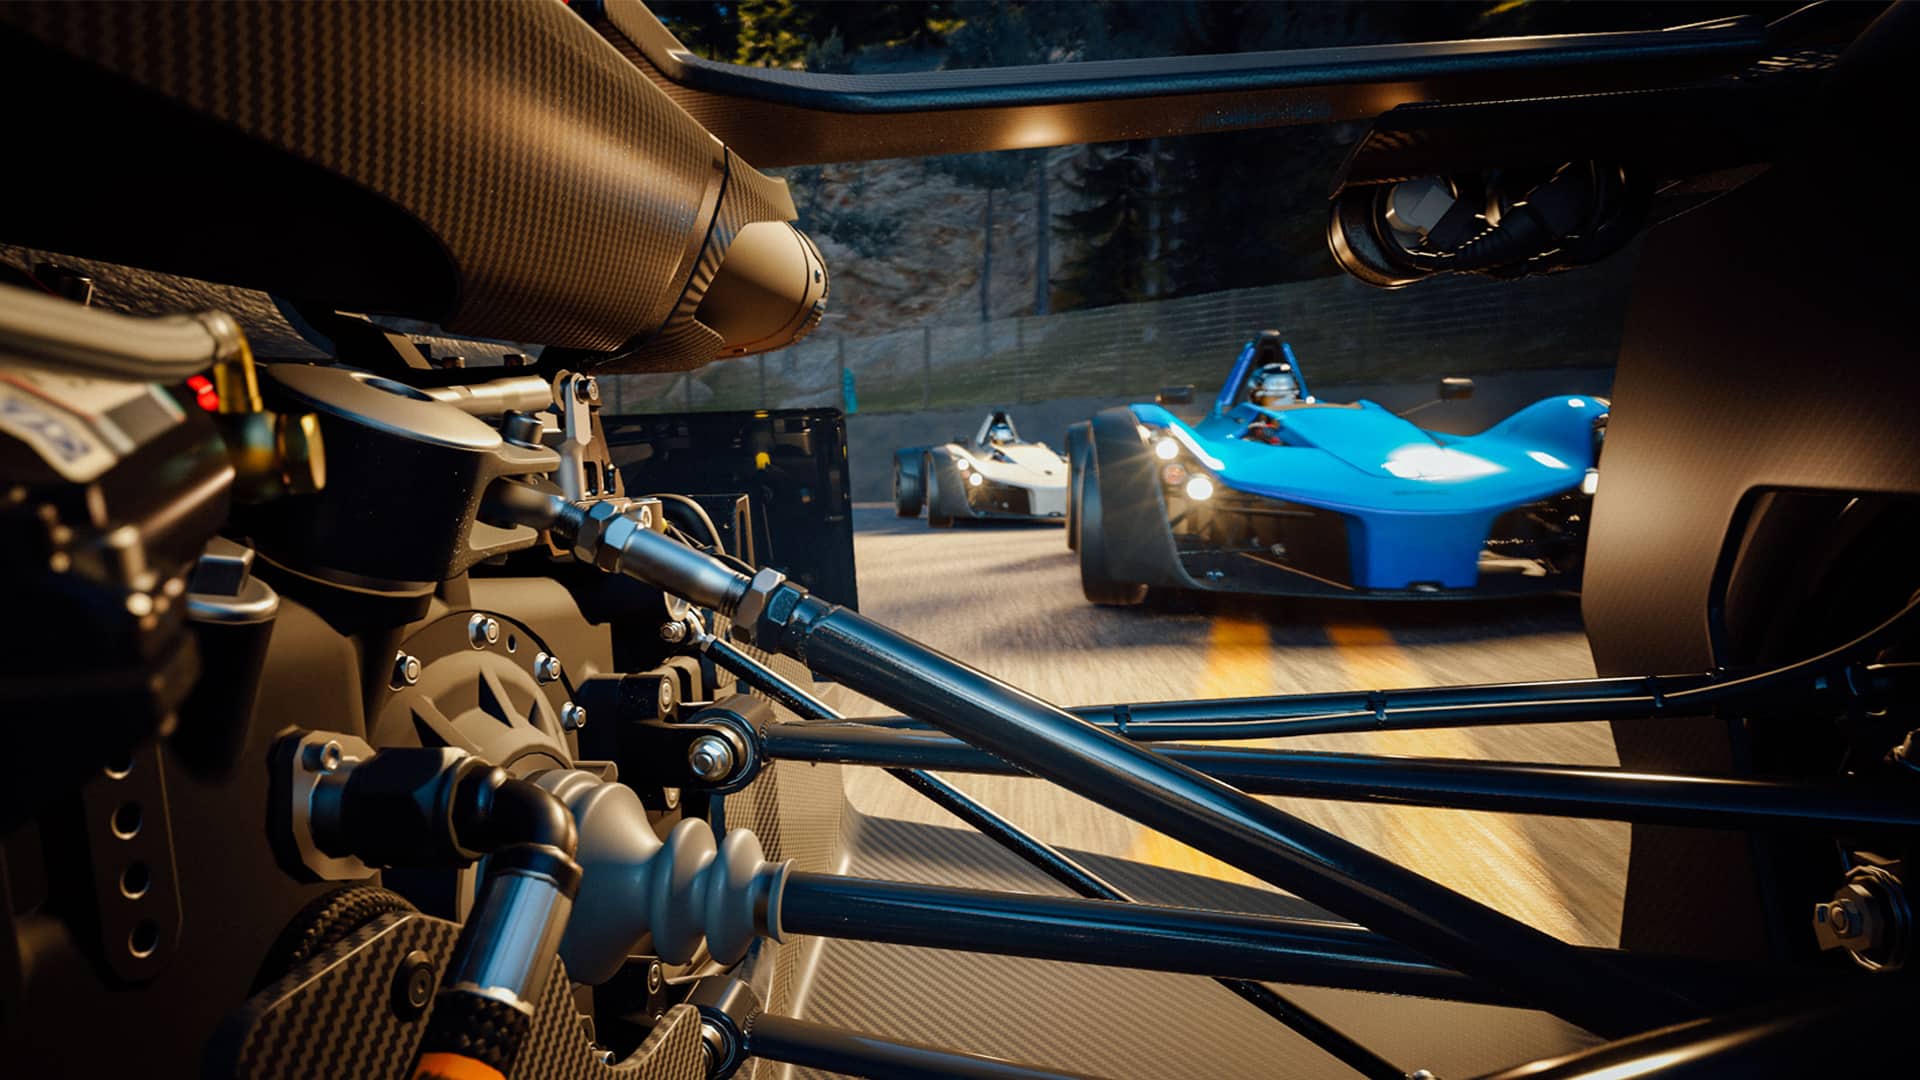 Gran Turismo 7 confirmed for PS4, PS5 upgrade path detailed